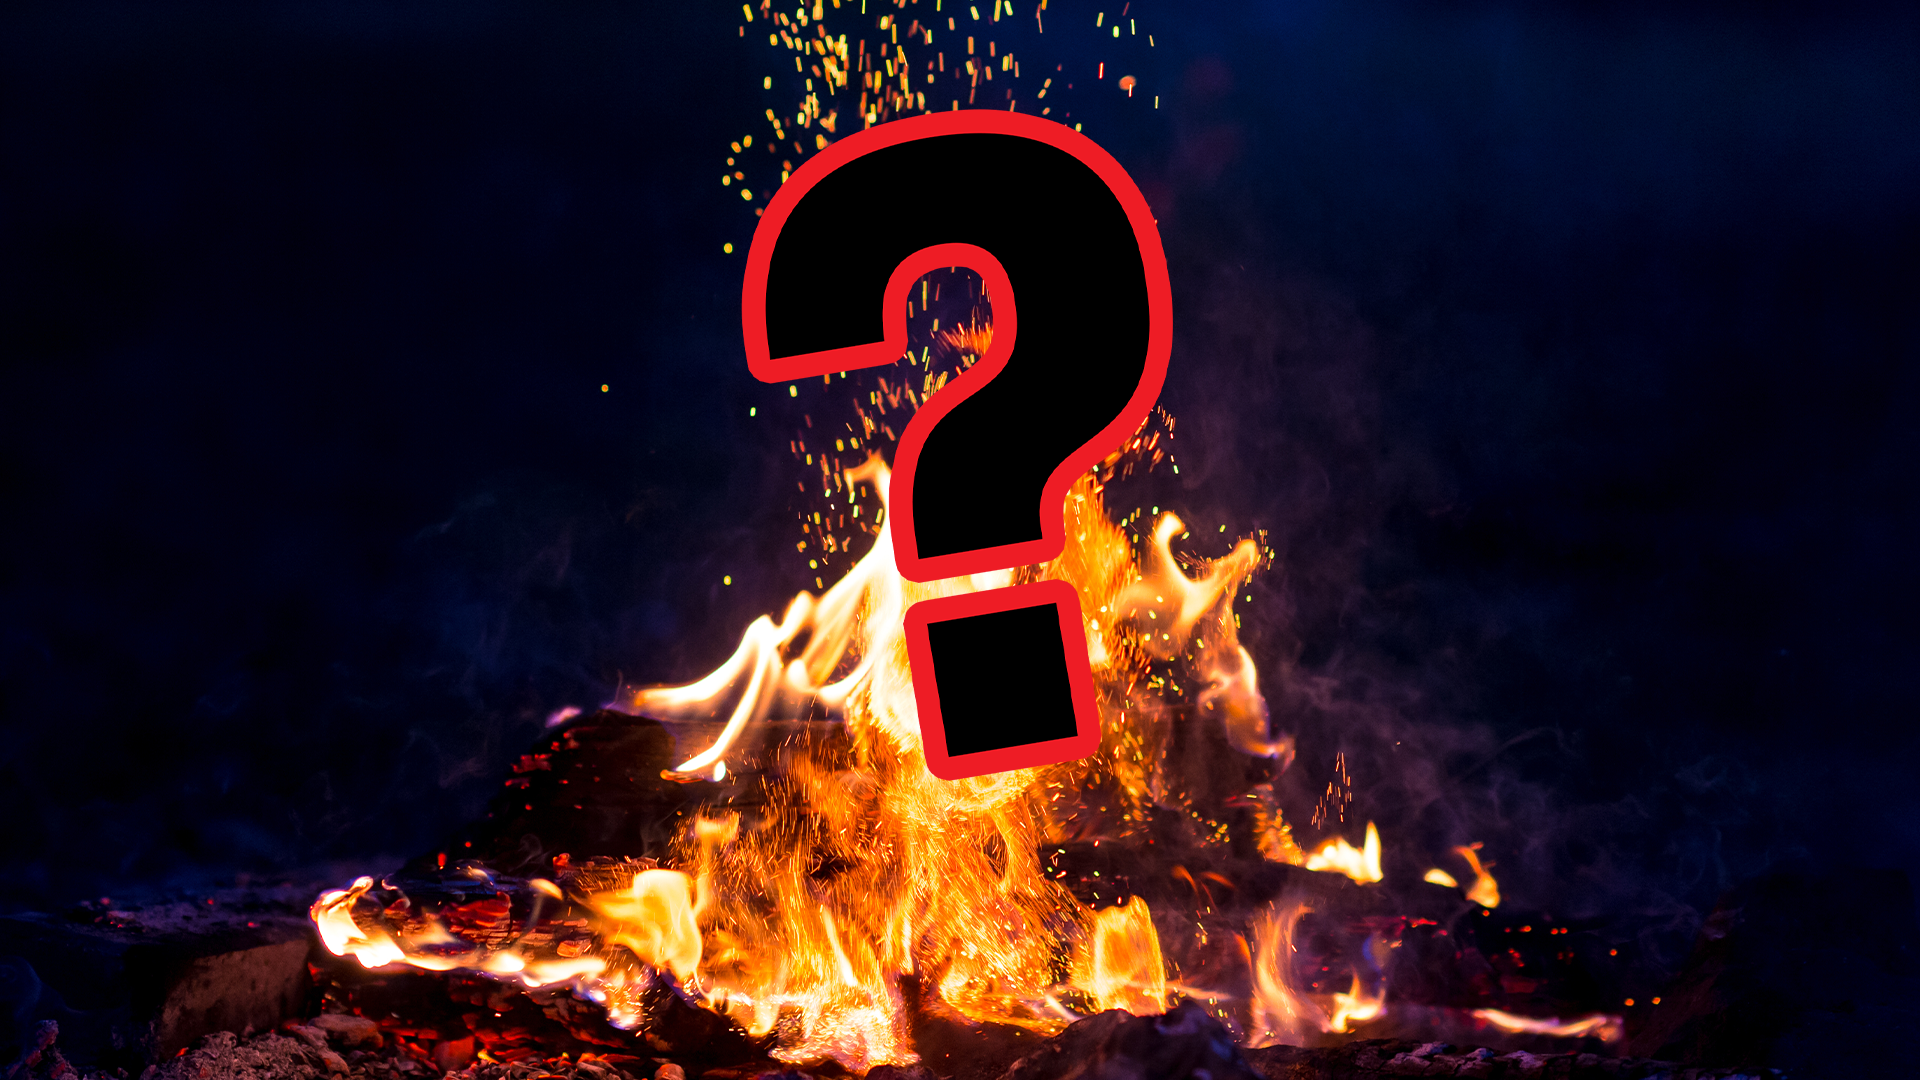 A camp fire and a question mark